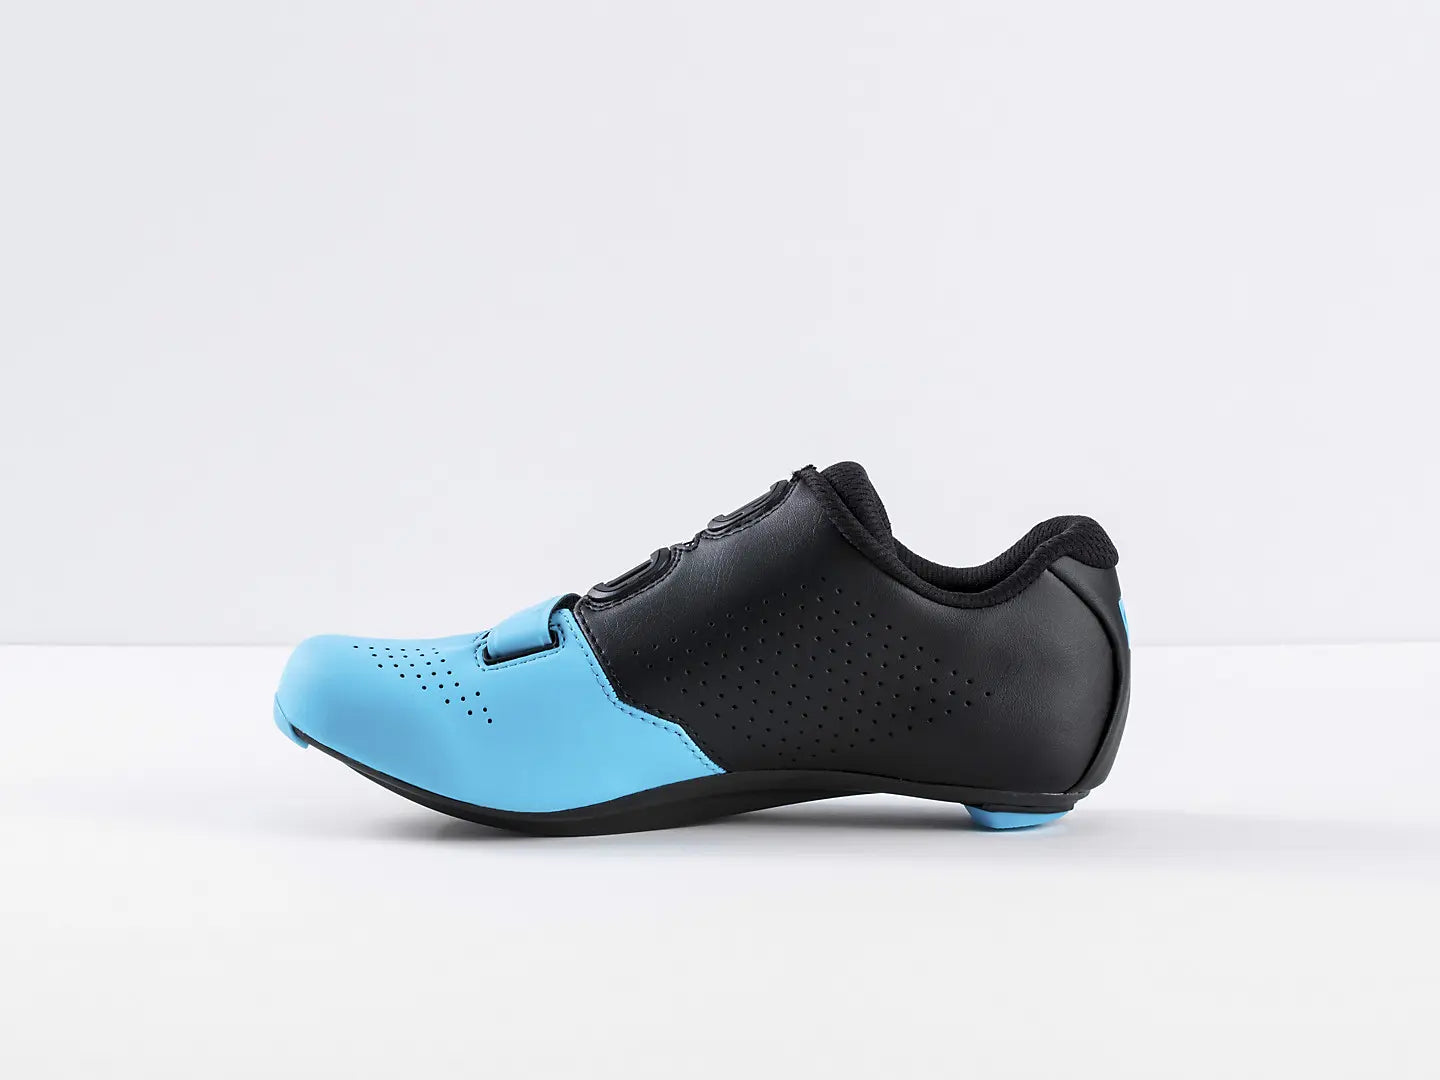 Shoes Bontrager Velocis Women's Road Cycling Wheels Bikes